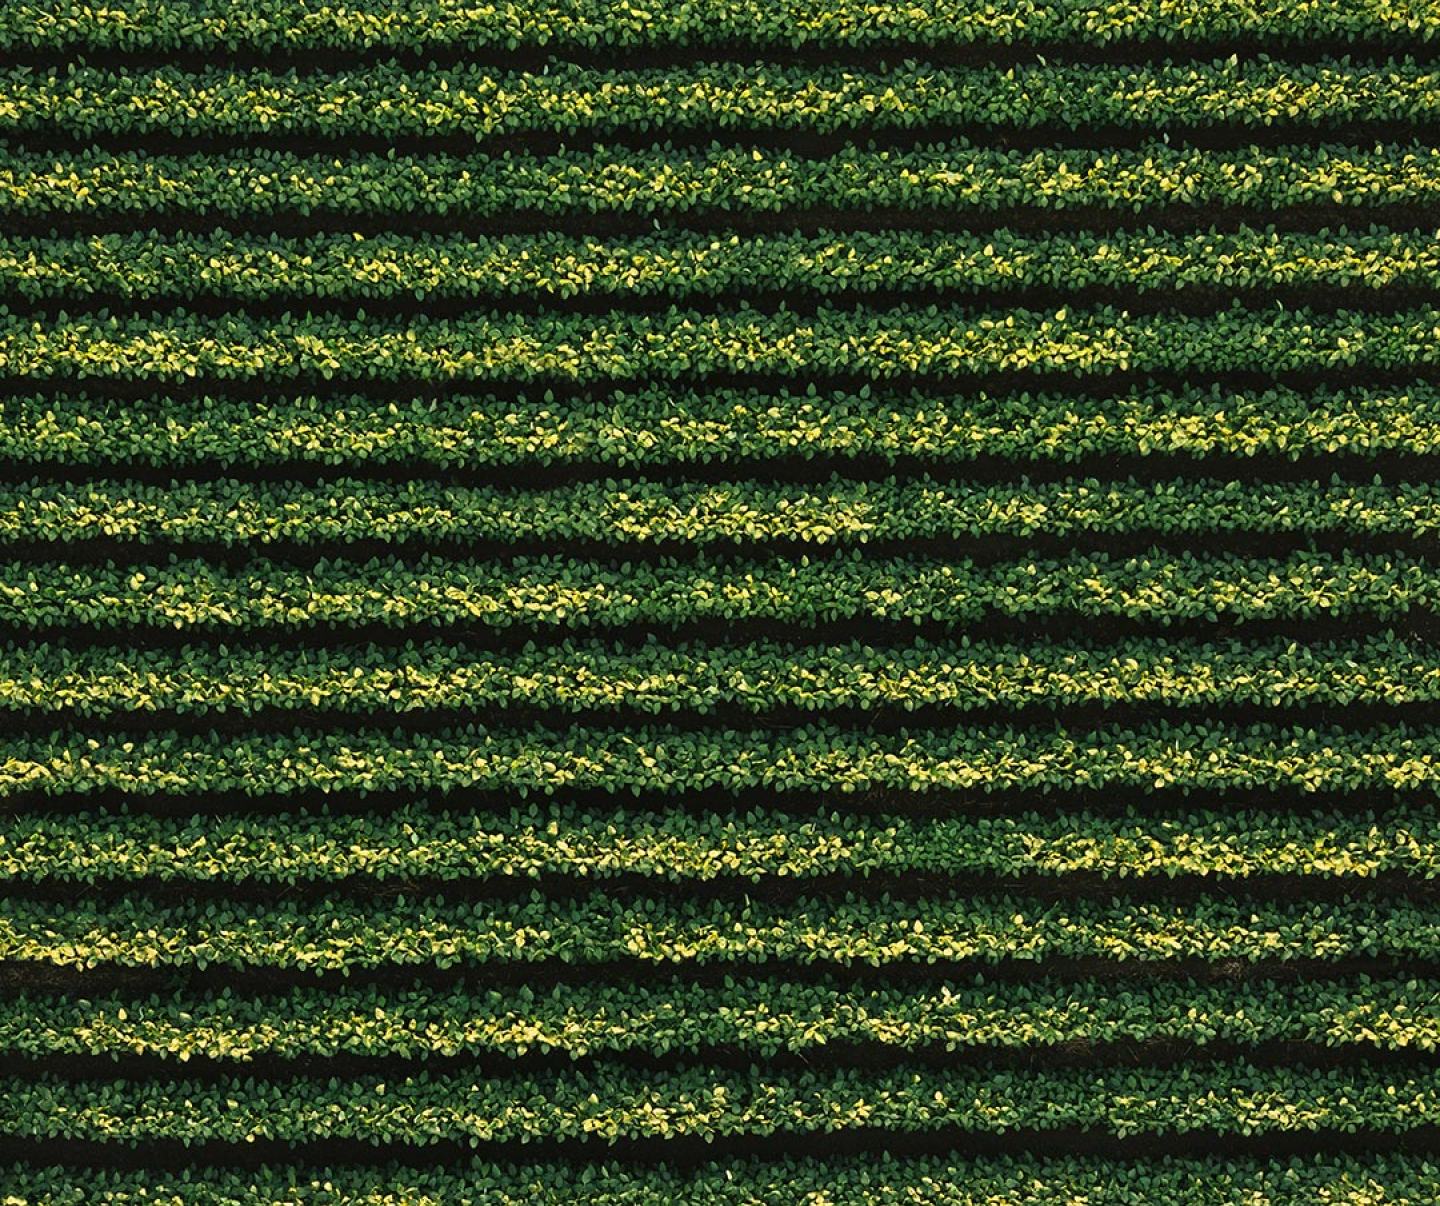 Aerial view of soybean rows